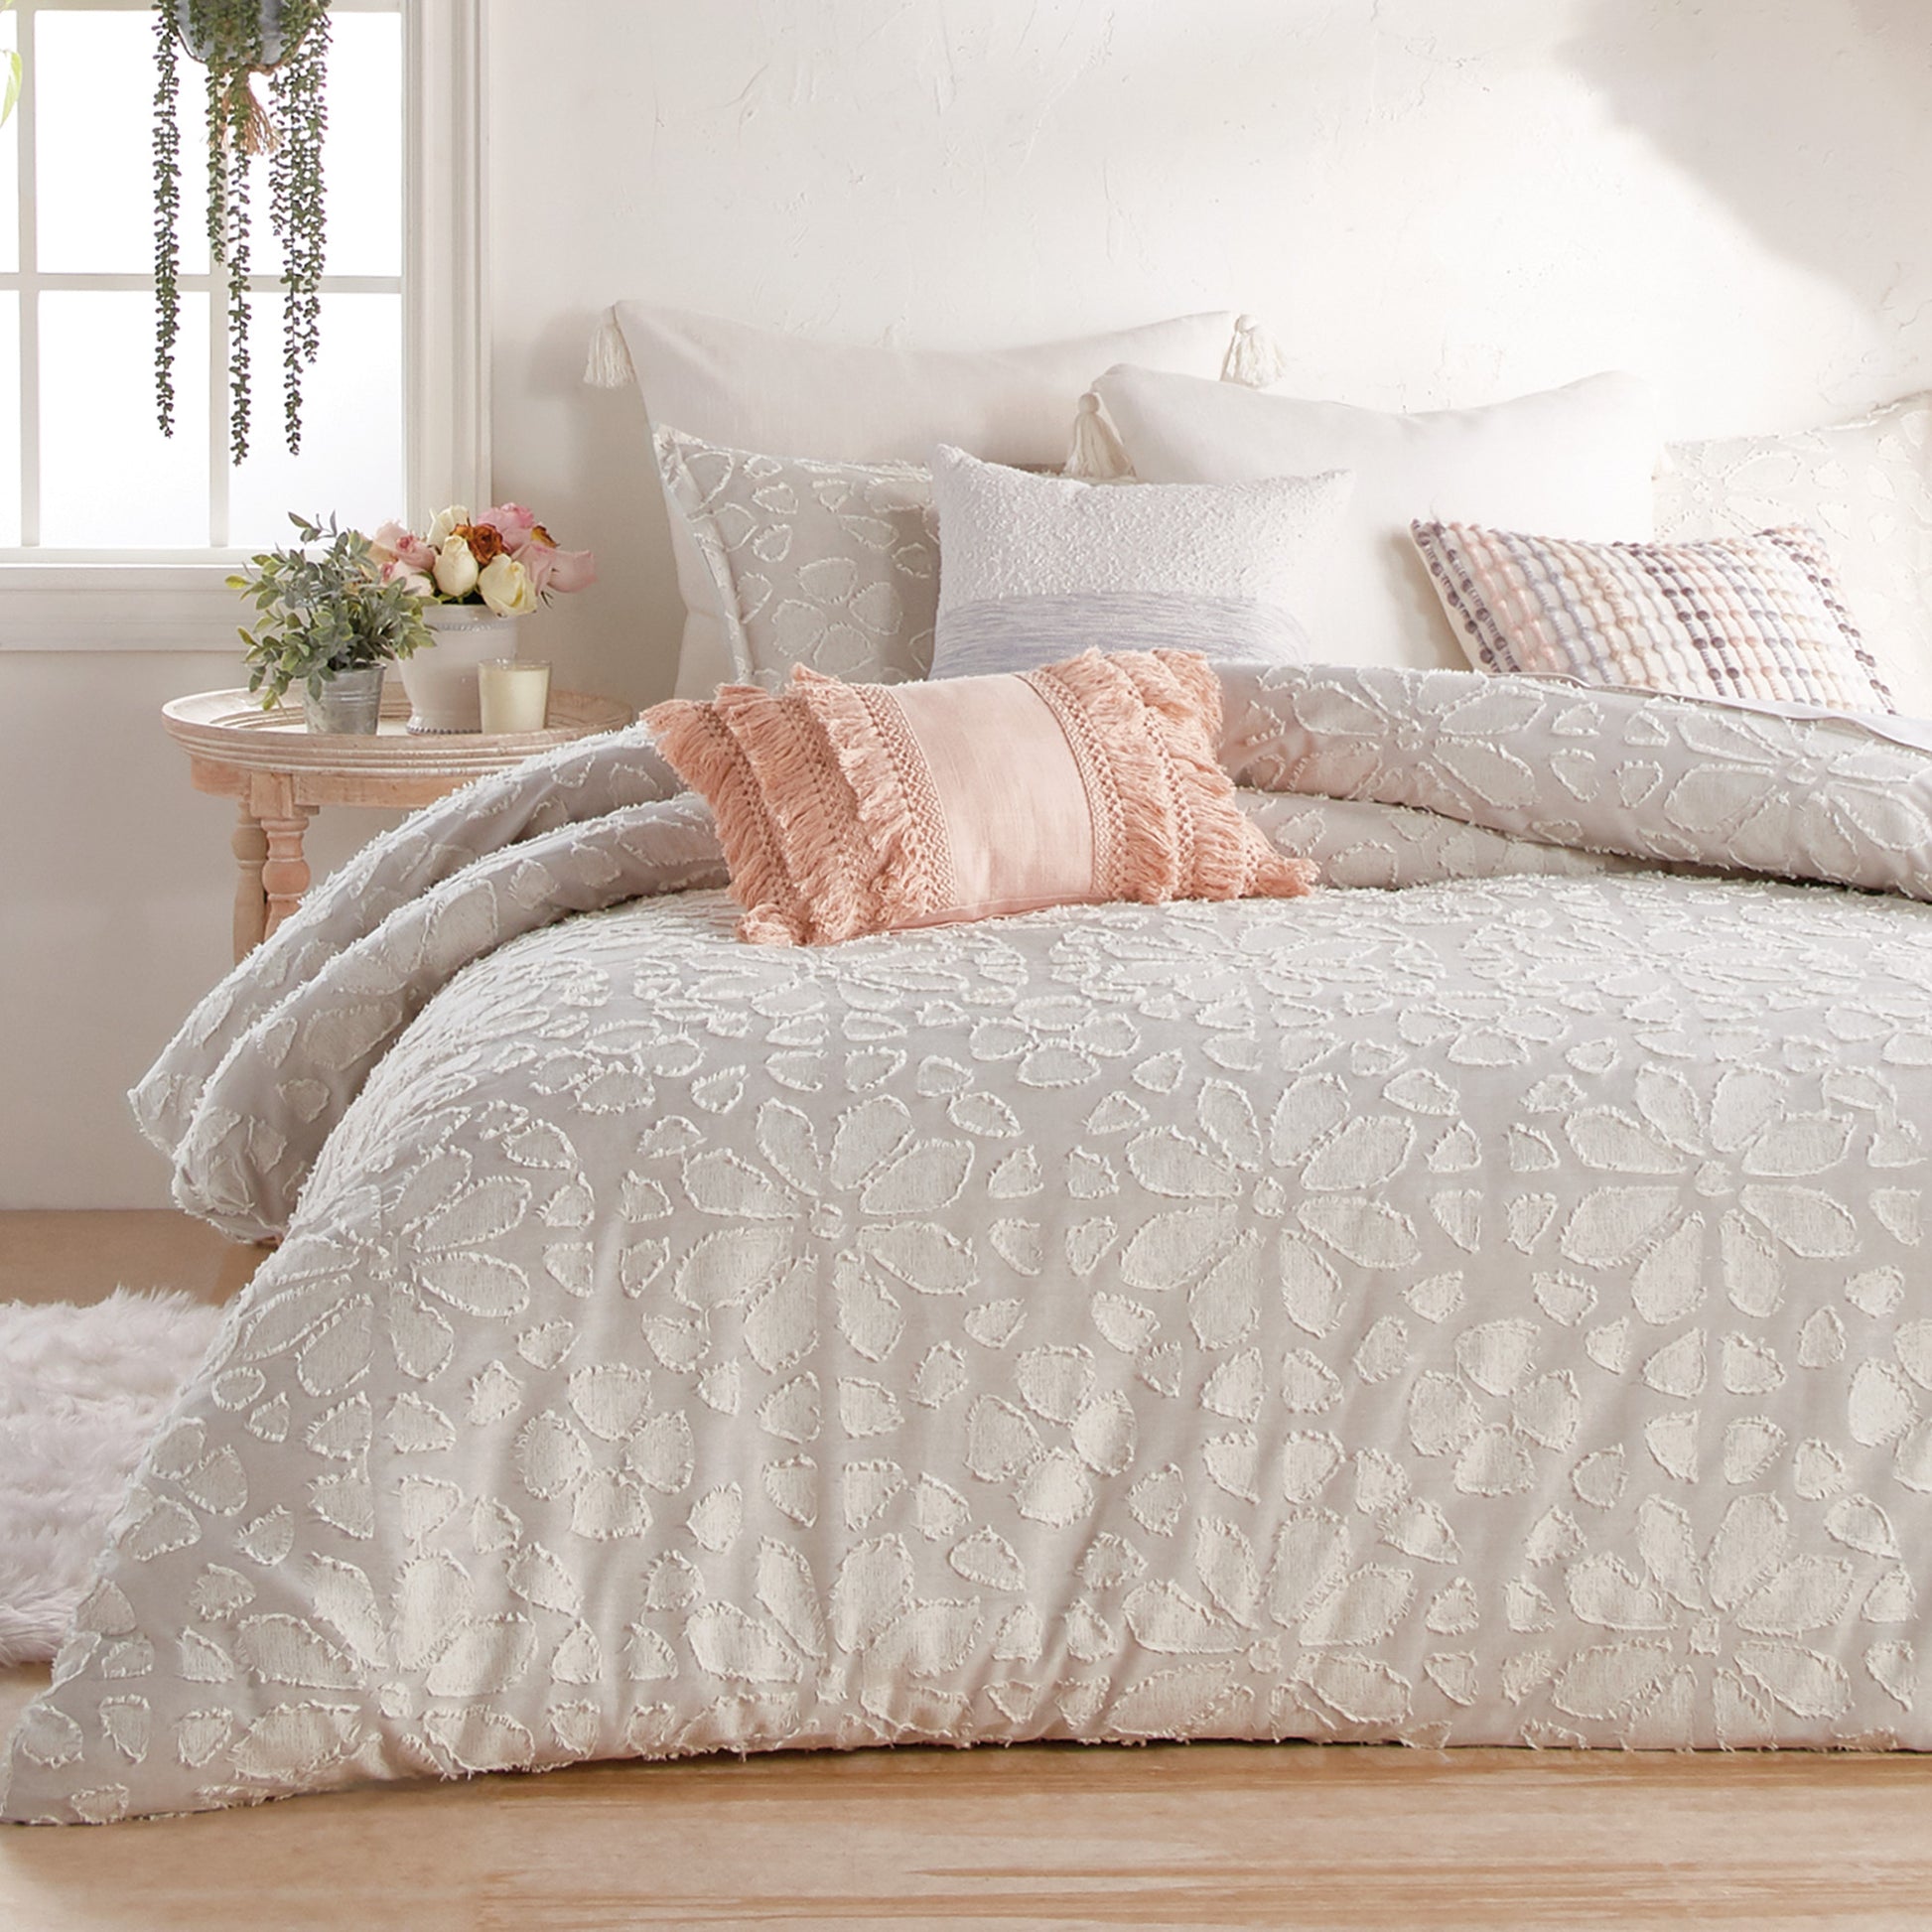 Peri Home Clipped Floral Comforter Set